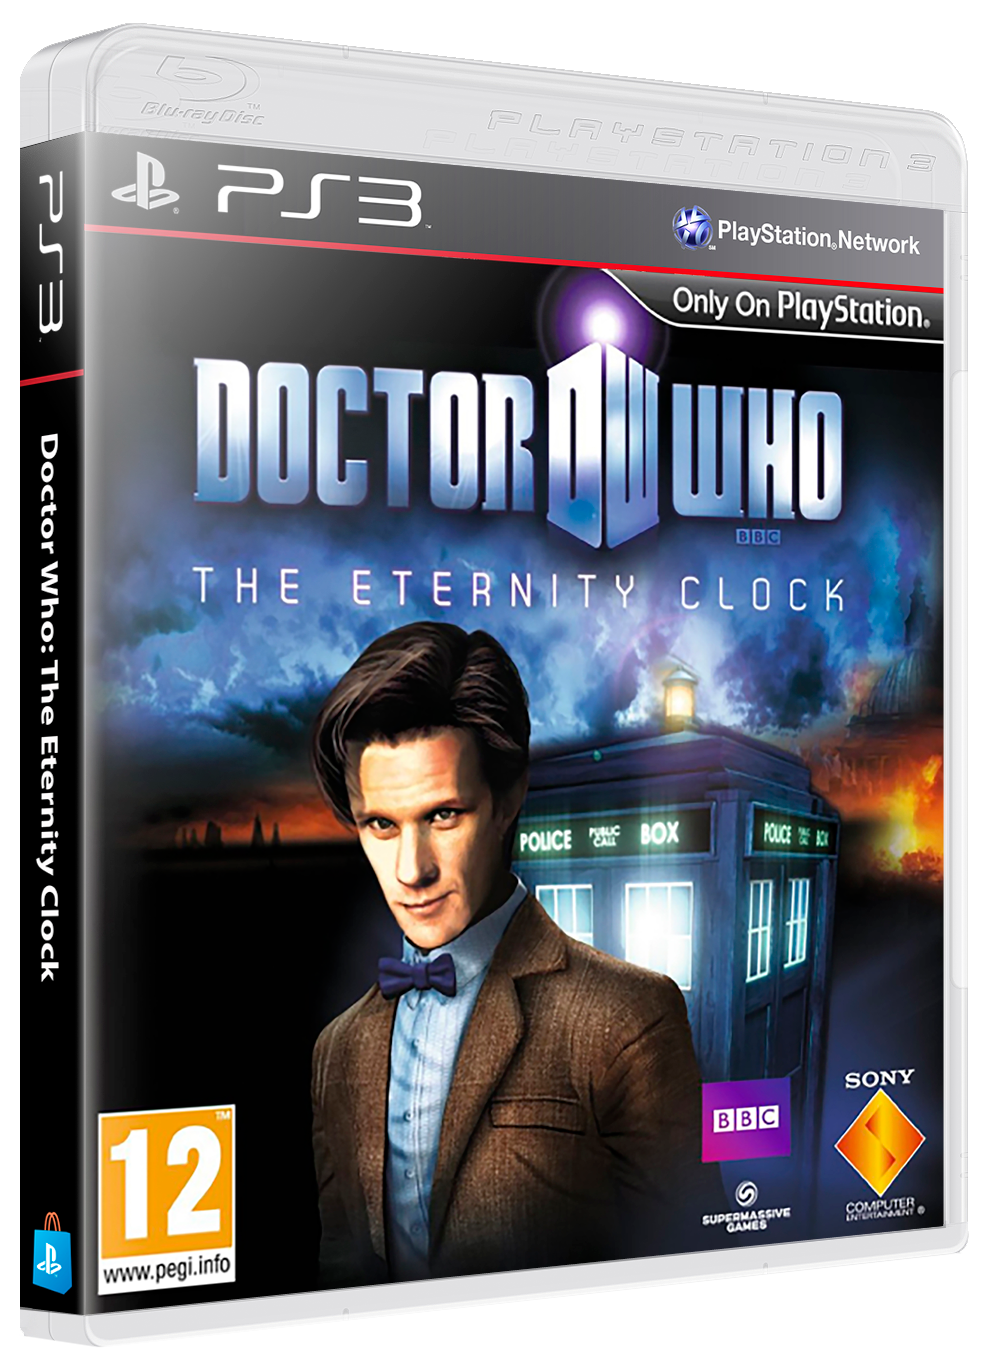 download doctor who eternity